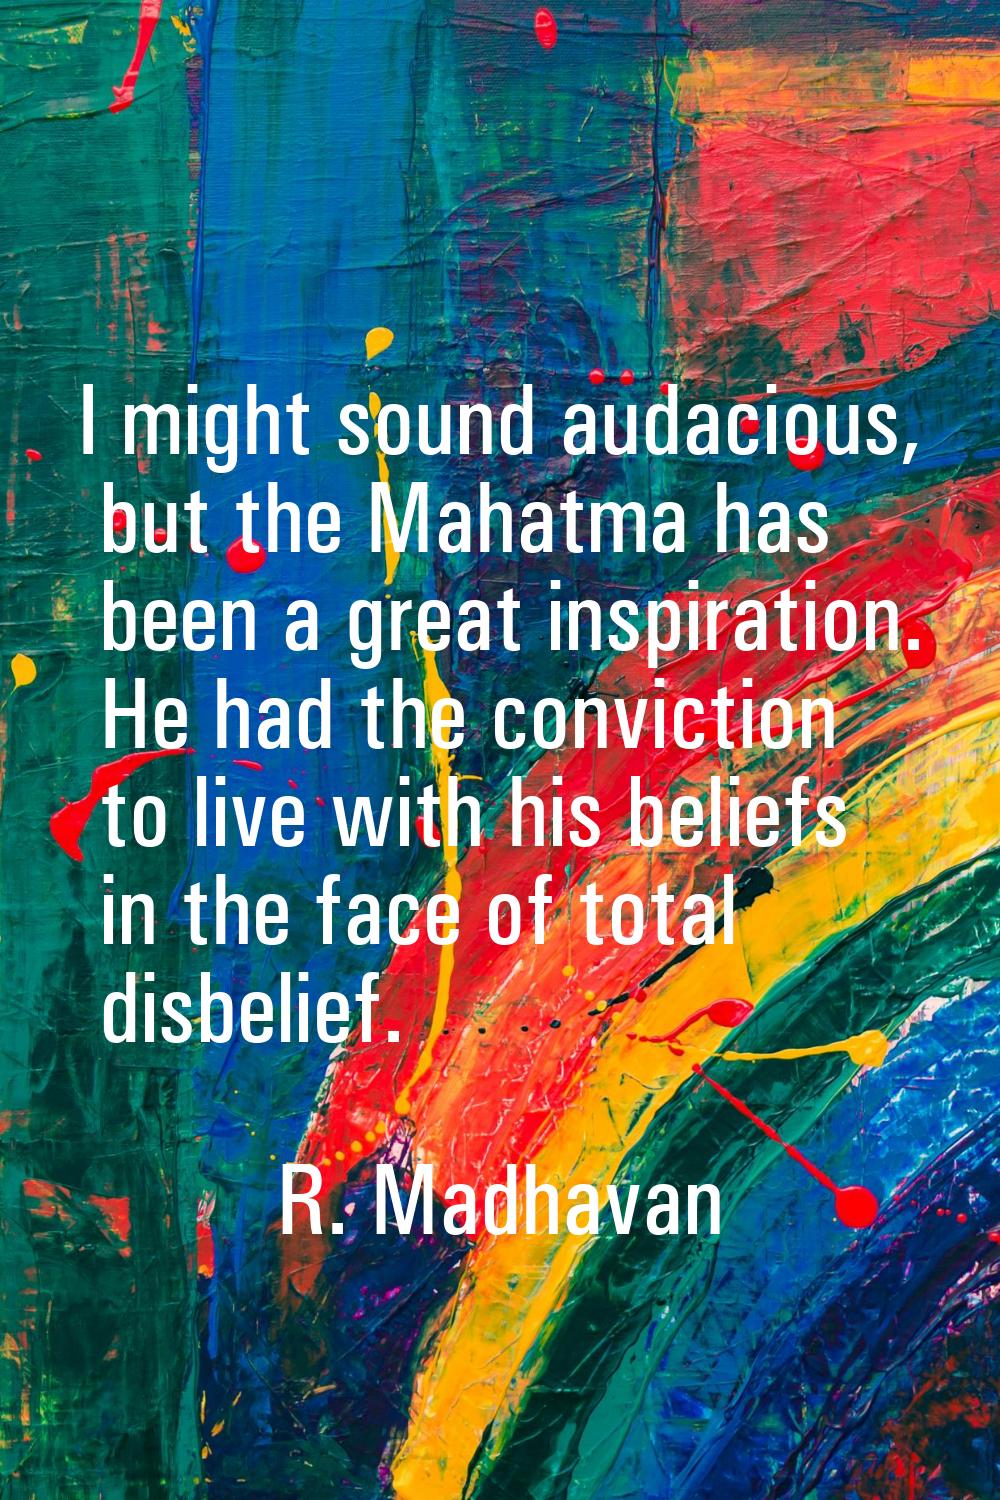 I might sound audacious, but the Mahatma has been a great inspiration. He had the conviction to liv